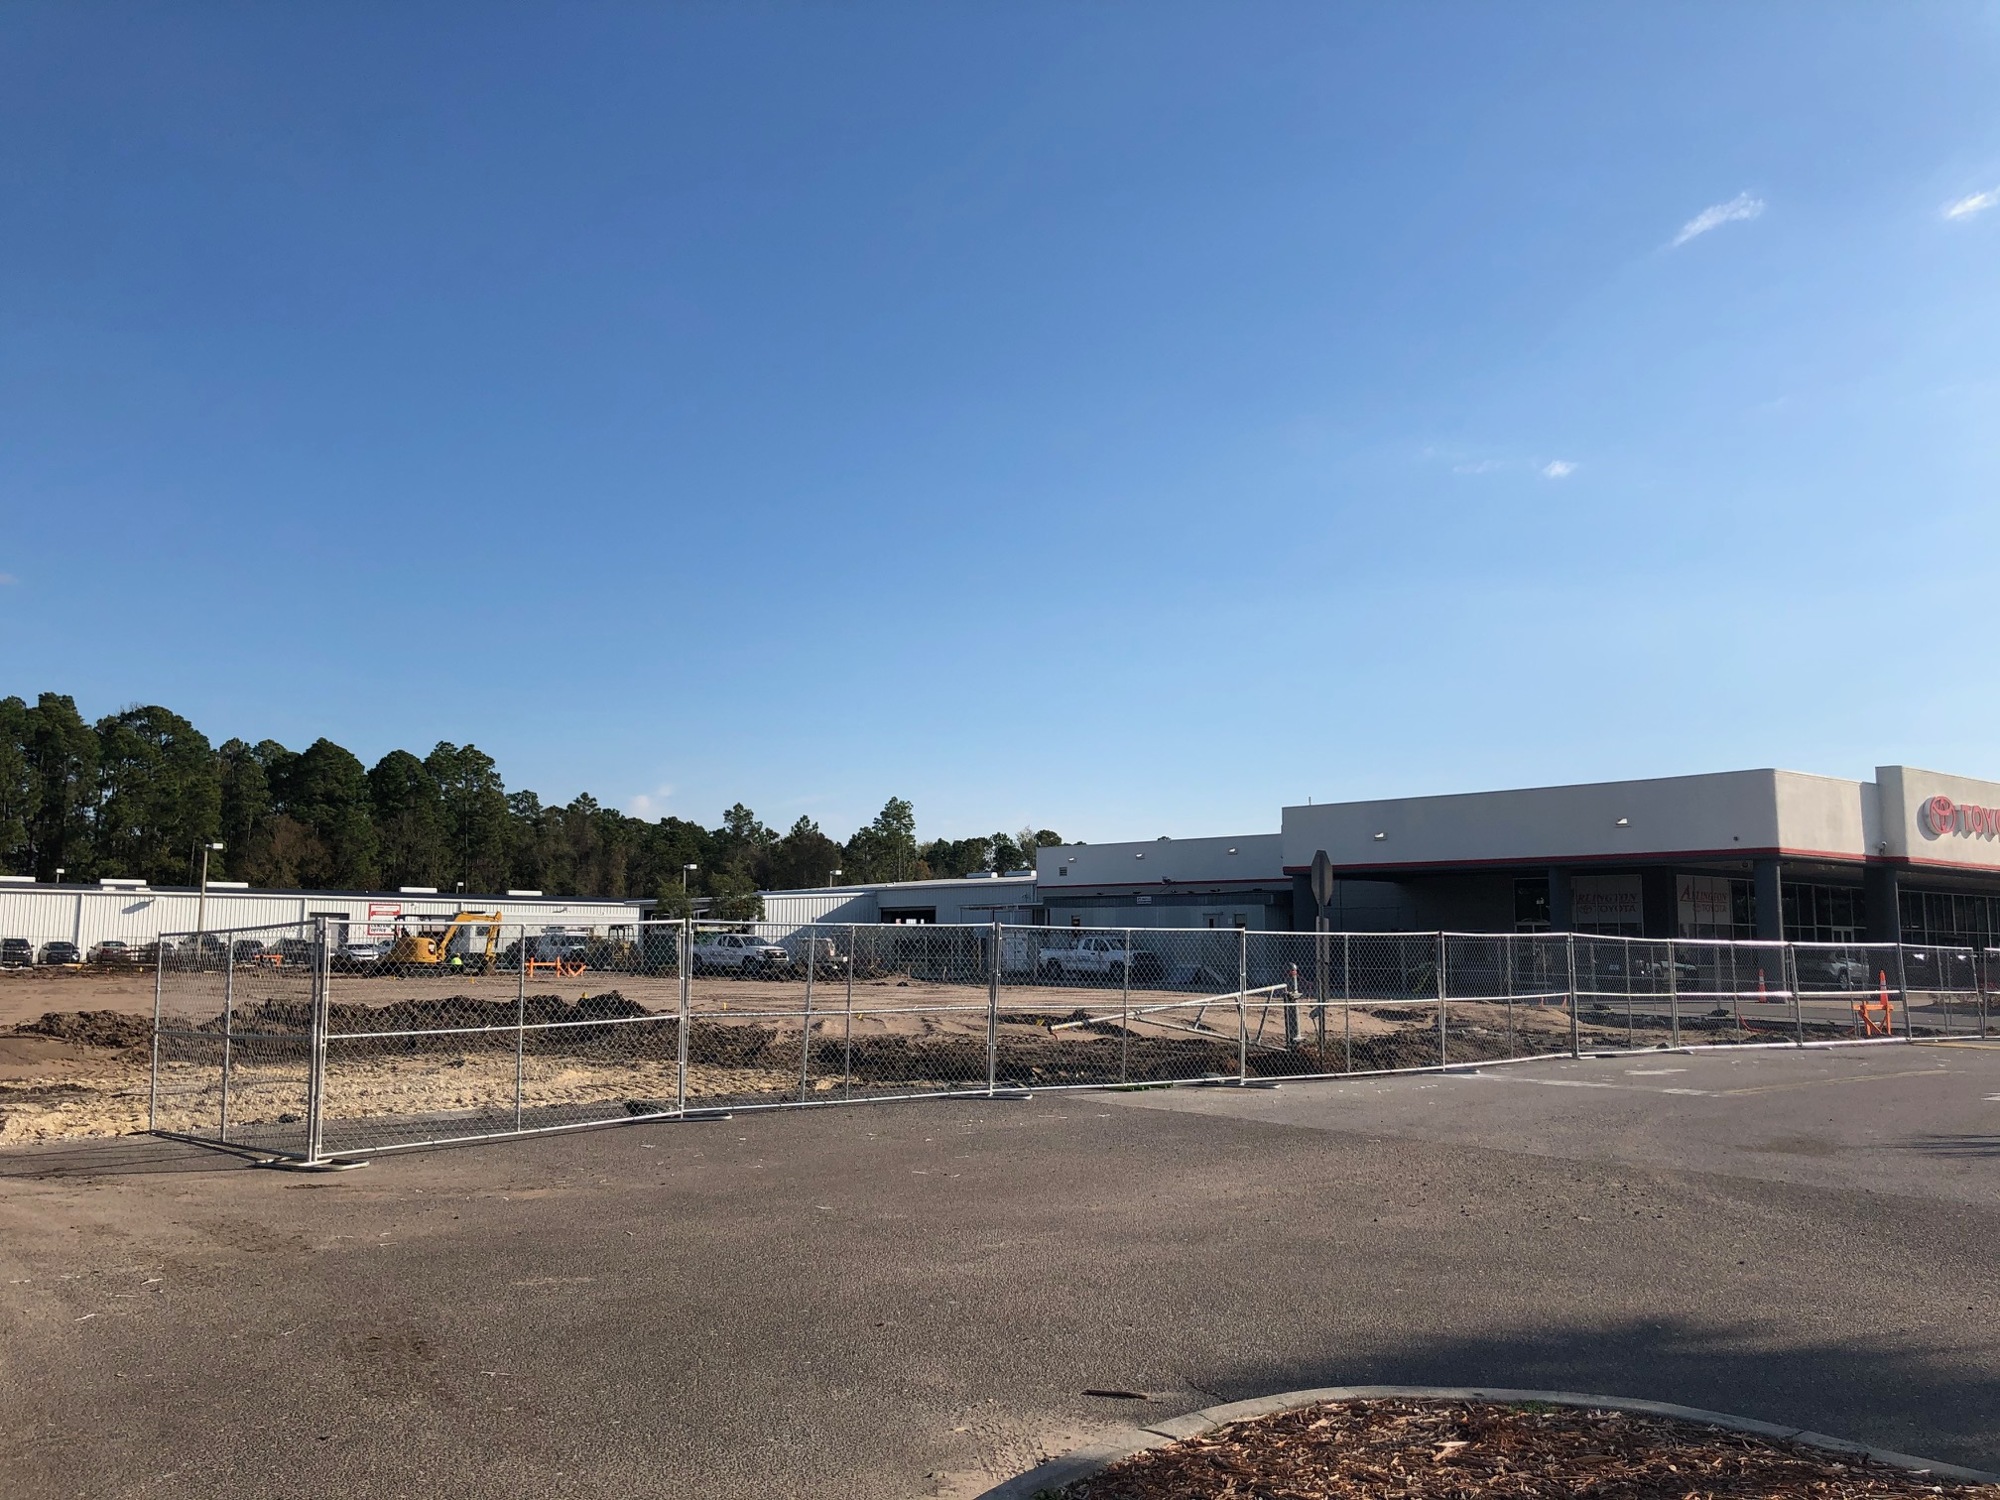 Stellar Group Inc. is building a new dealership for Arlington Toyota at 10939 Atlantic Blvd. It demolished retail space for the project and will renovate existing buildings.